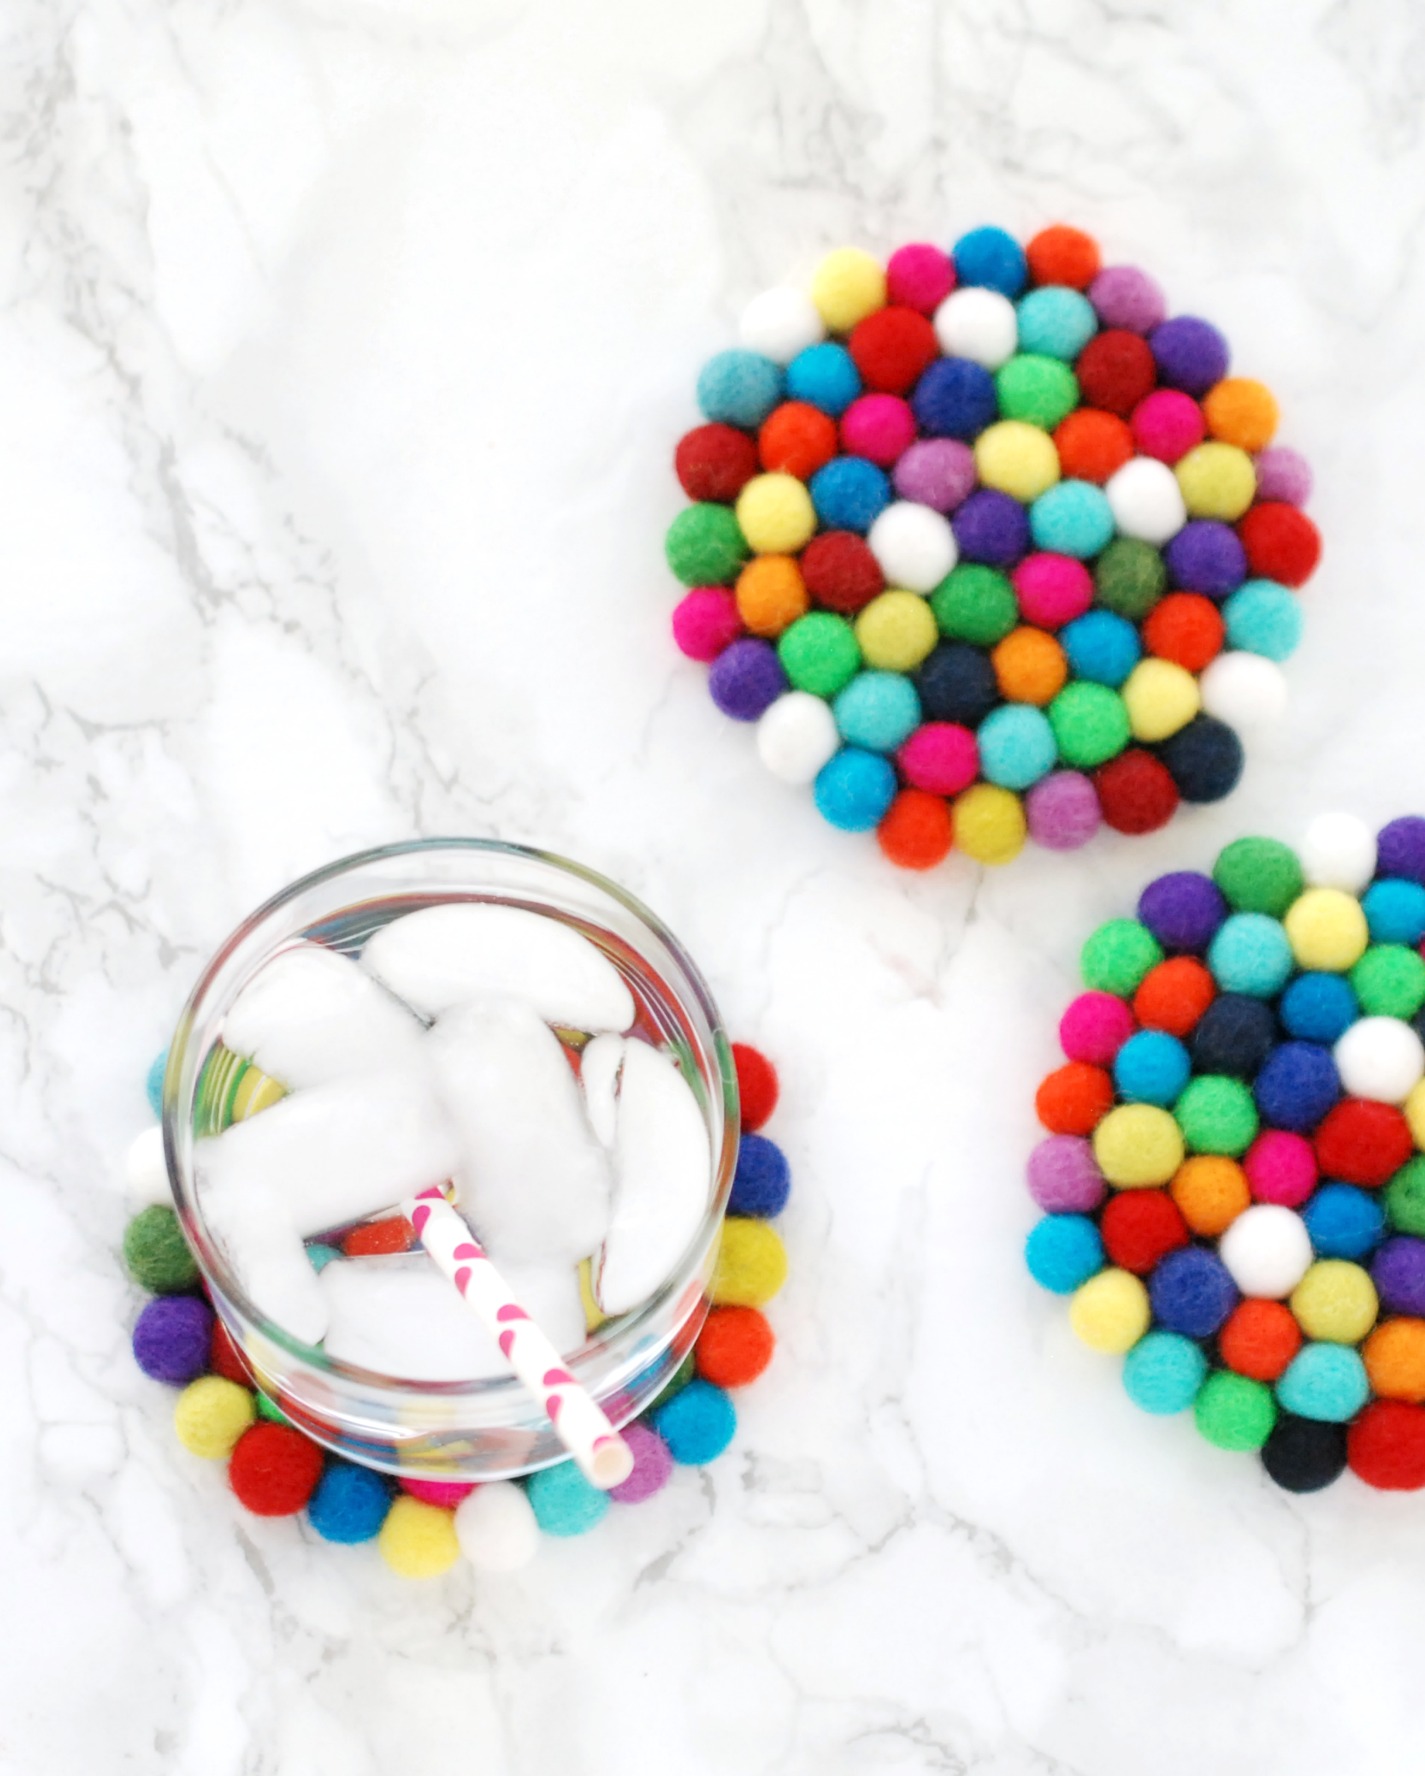 Felt ball coasters are easy and inexpensive to make, but add such a fun pop of color to your home.